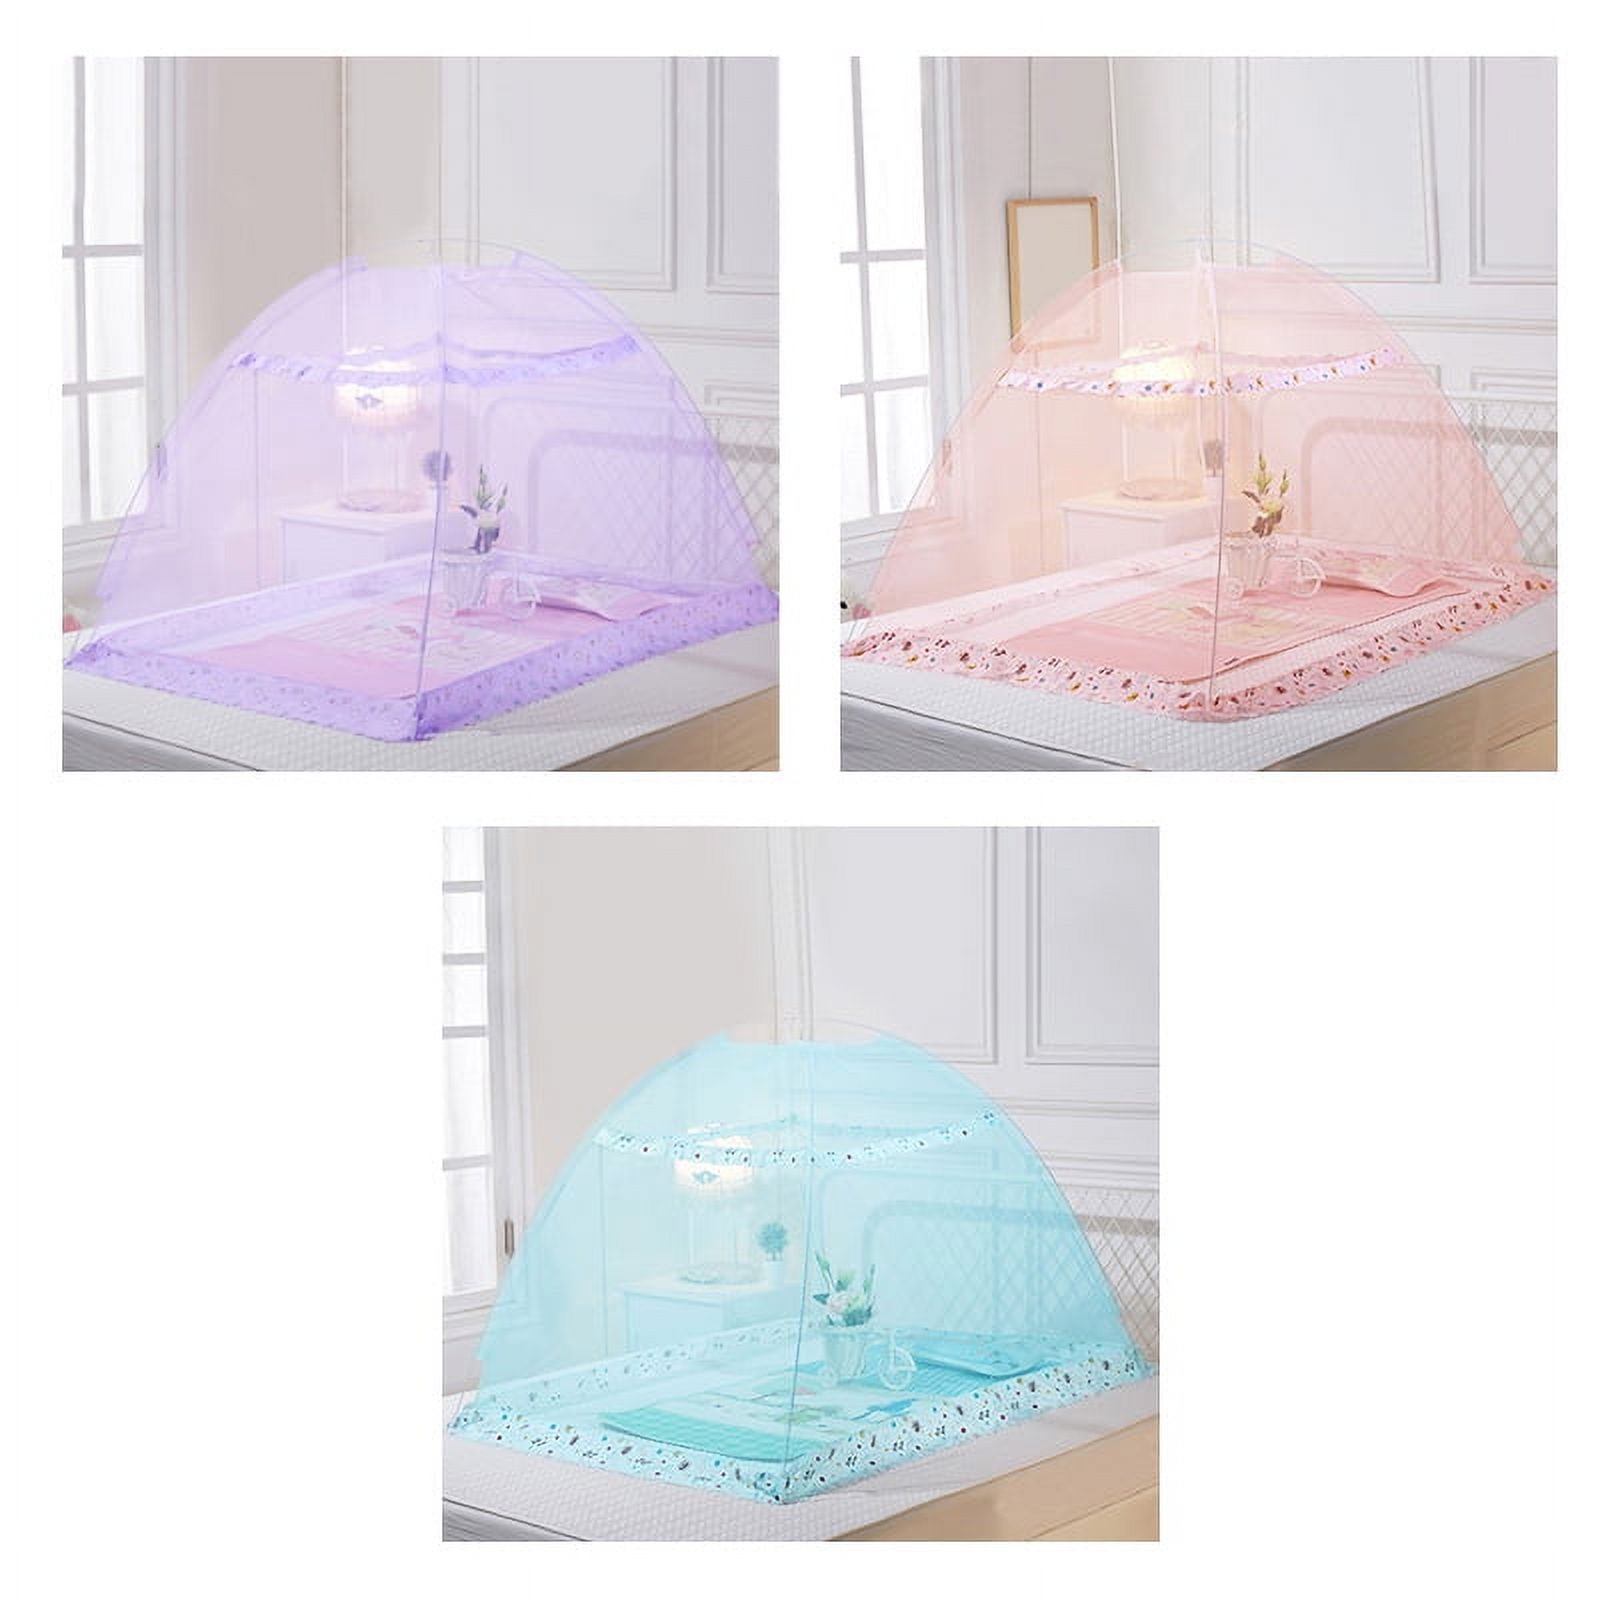 Portable Foldable Mosquito Nets Multifunction Bedroom Baby Kids Bed Nets;Portable Foldable Mosquito Nets Multifunction Bedroom Baby Kids Bed Nets - image 5 of 9